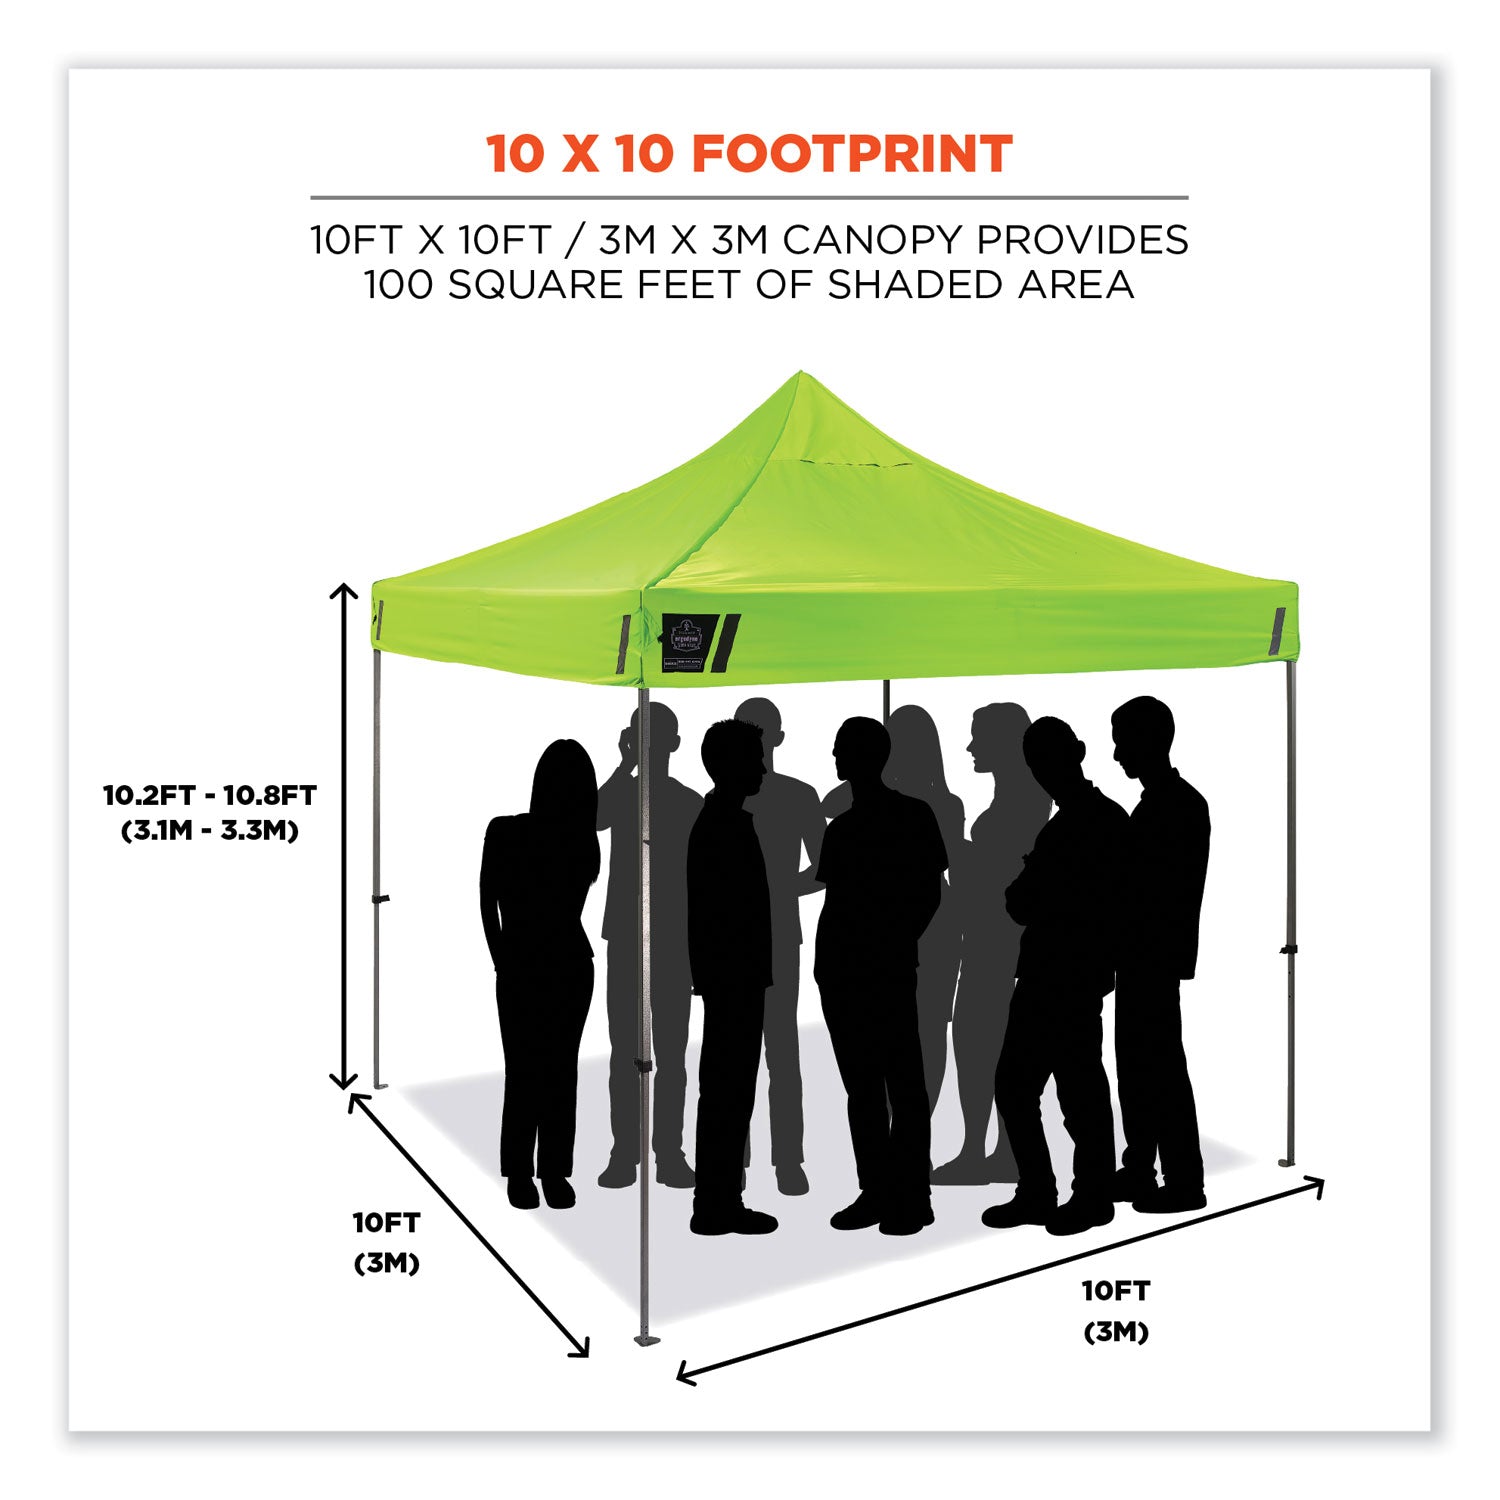 shax-6000-heavy-duty-pop-up-tent-single-skin-10-ft-x-10-ft-polyester-steel-lime-ships-in-1-3-business-days_ego12900 - 2